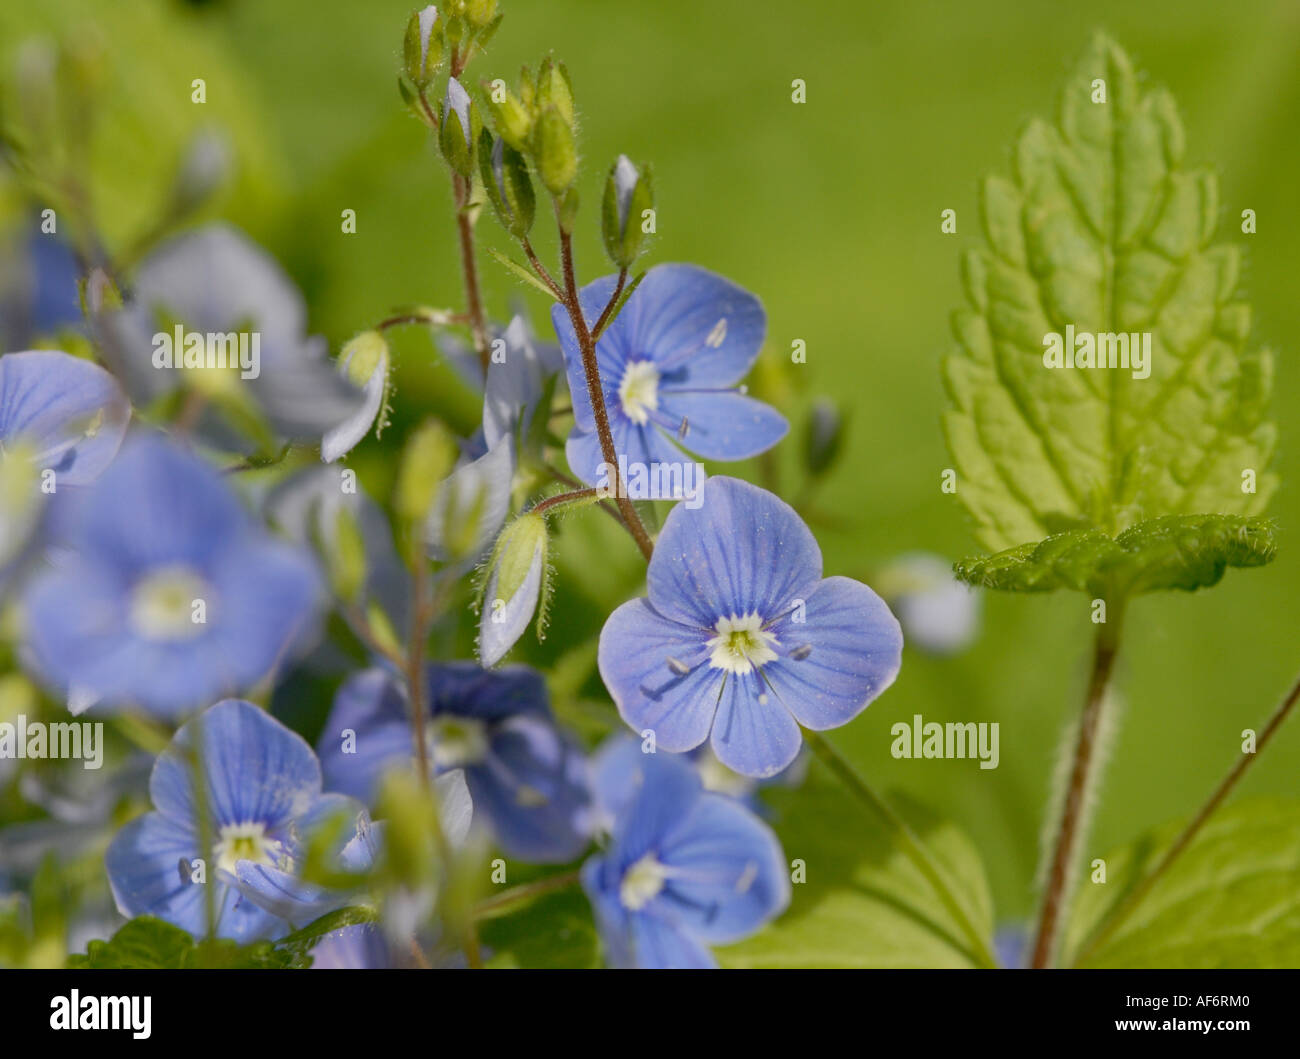 Flowers buds and leaf of Germander speedwell Stock Photo